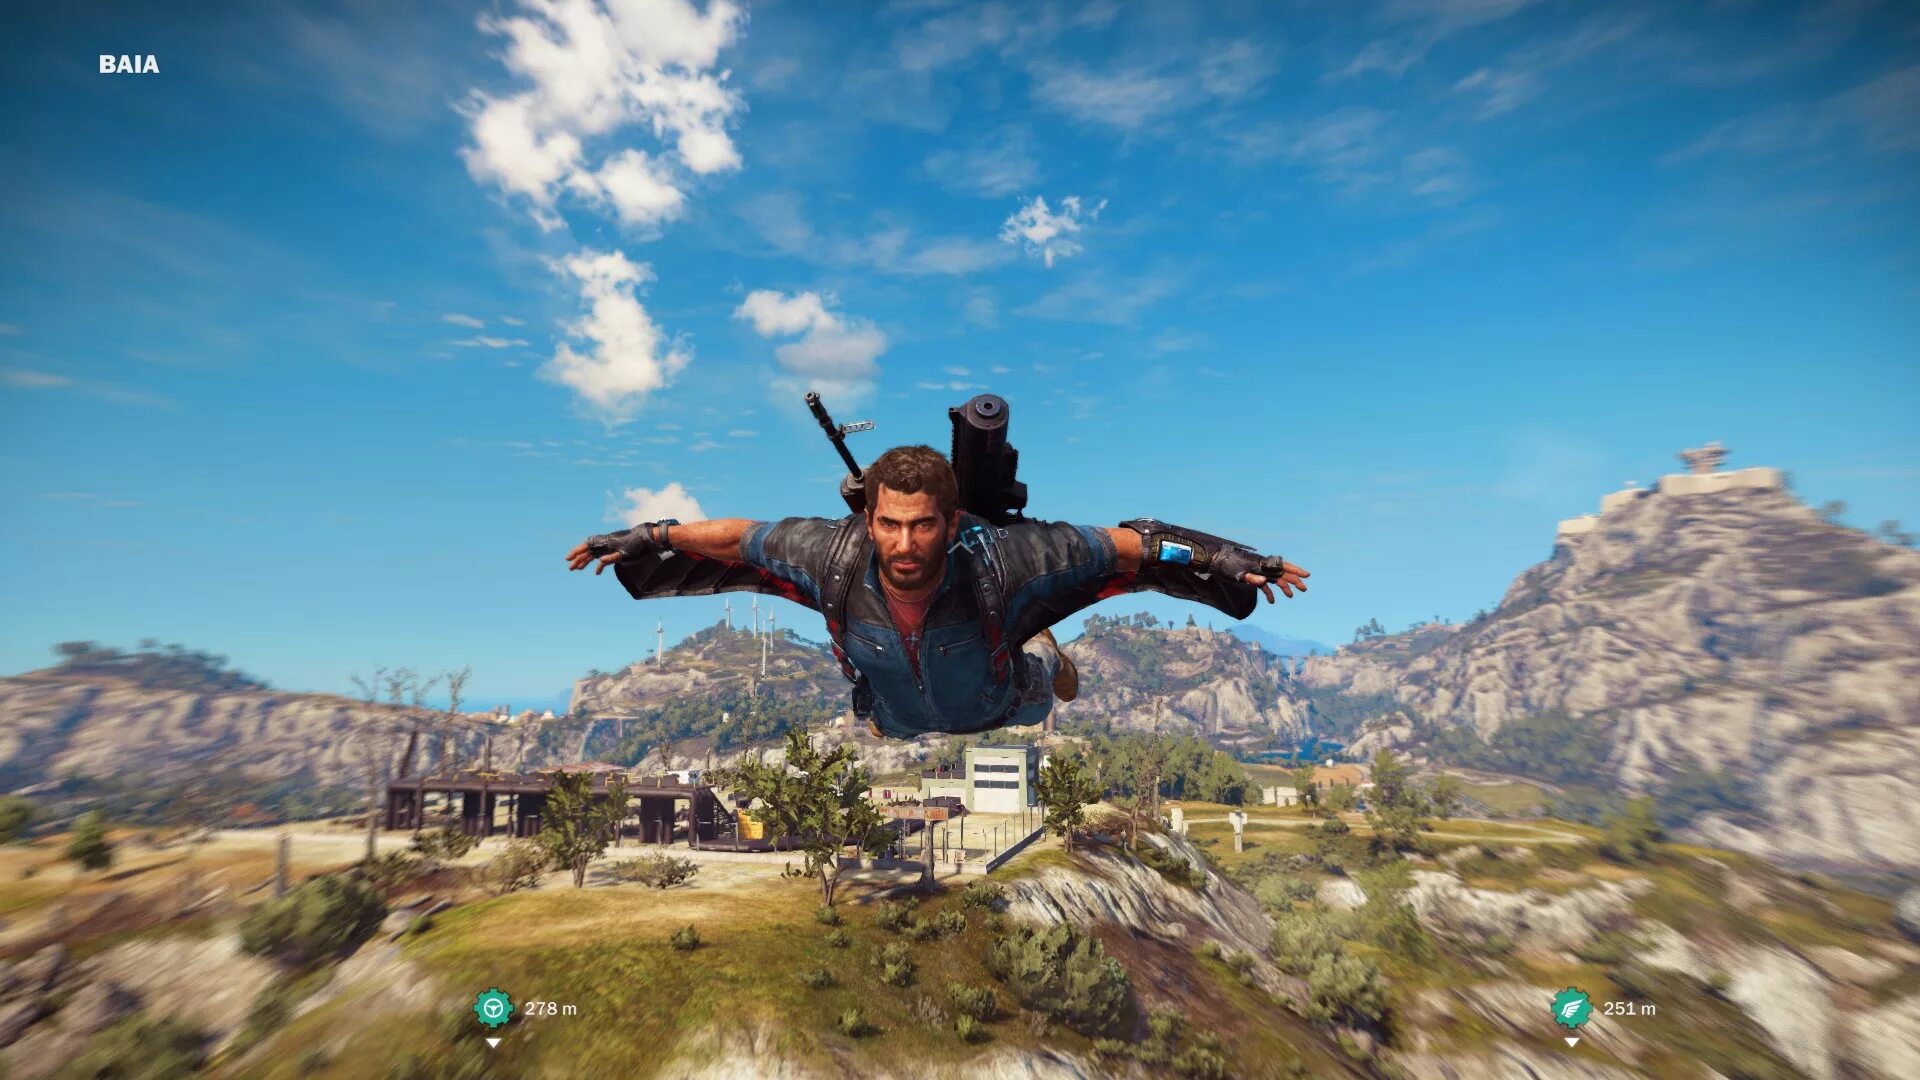 T cause 3. Just cause 4 агенты. Just cause 3 just cause 2. Джаст каус 3 ПС 3. Ди Равелло just cause 3.